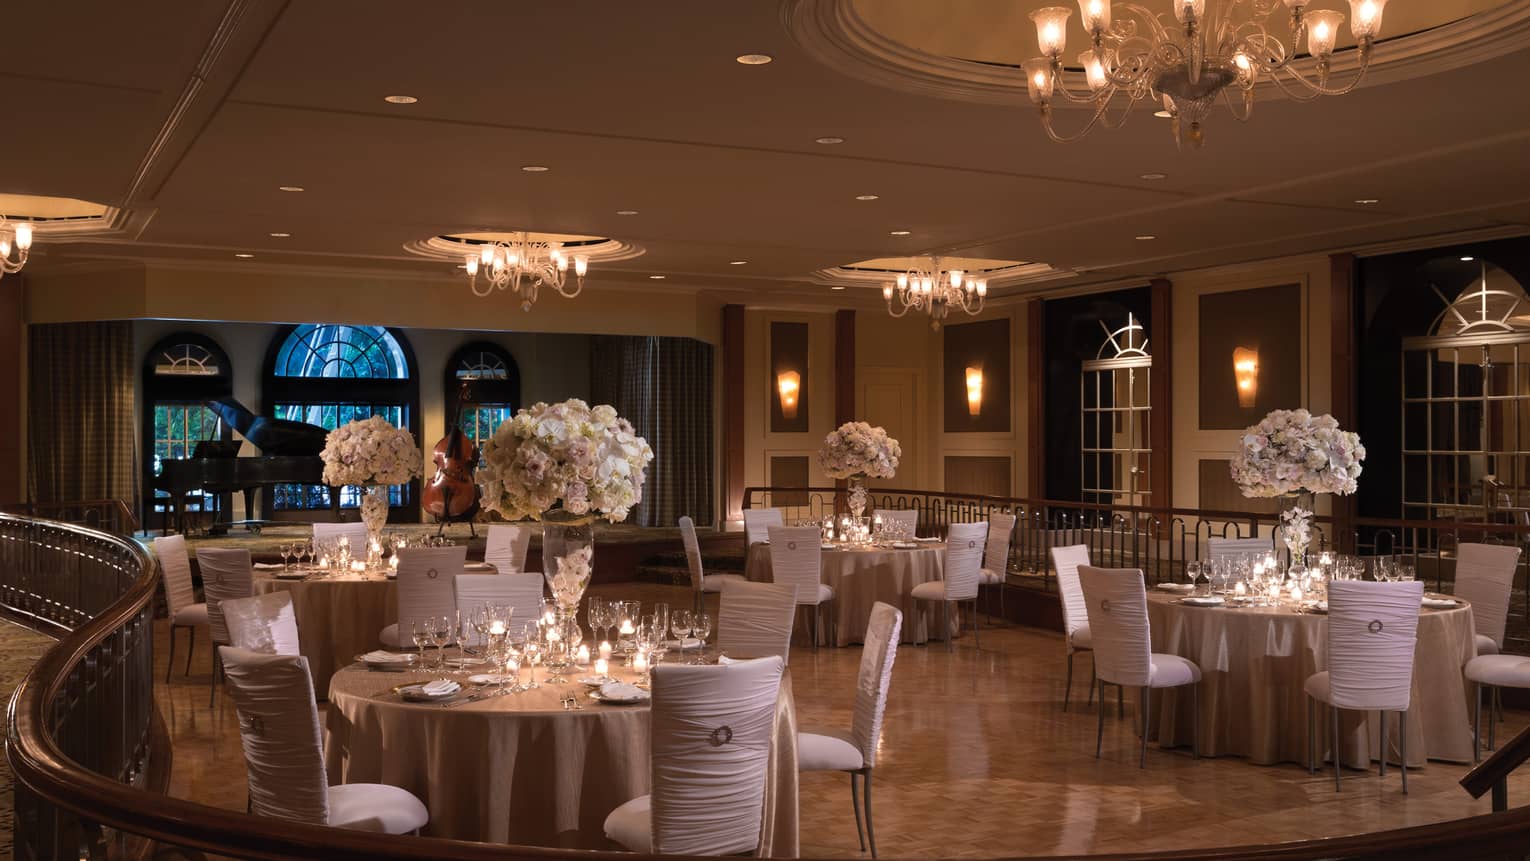 Elegant wedding reception tables with white chairs, flowers on ballroom floor